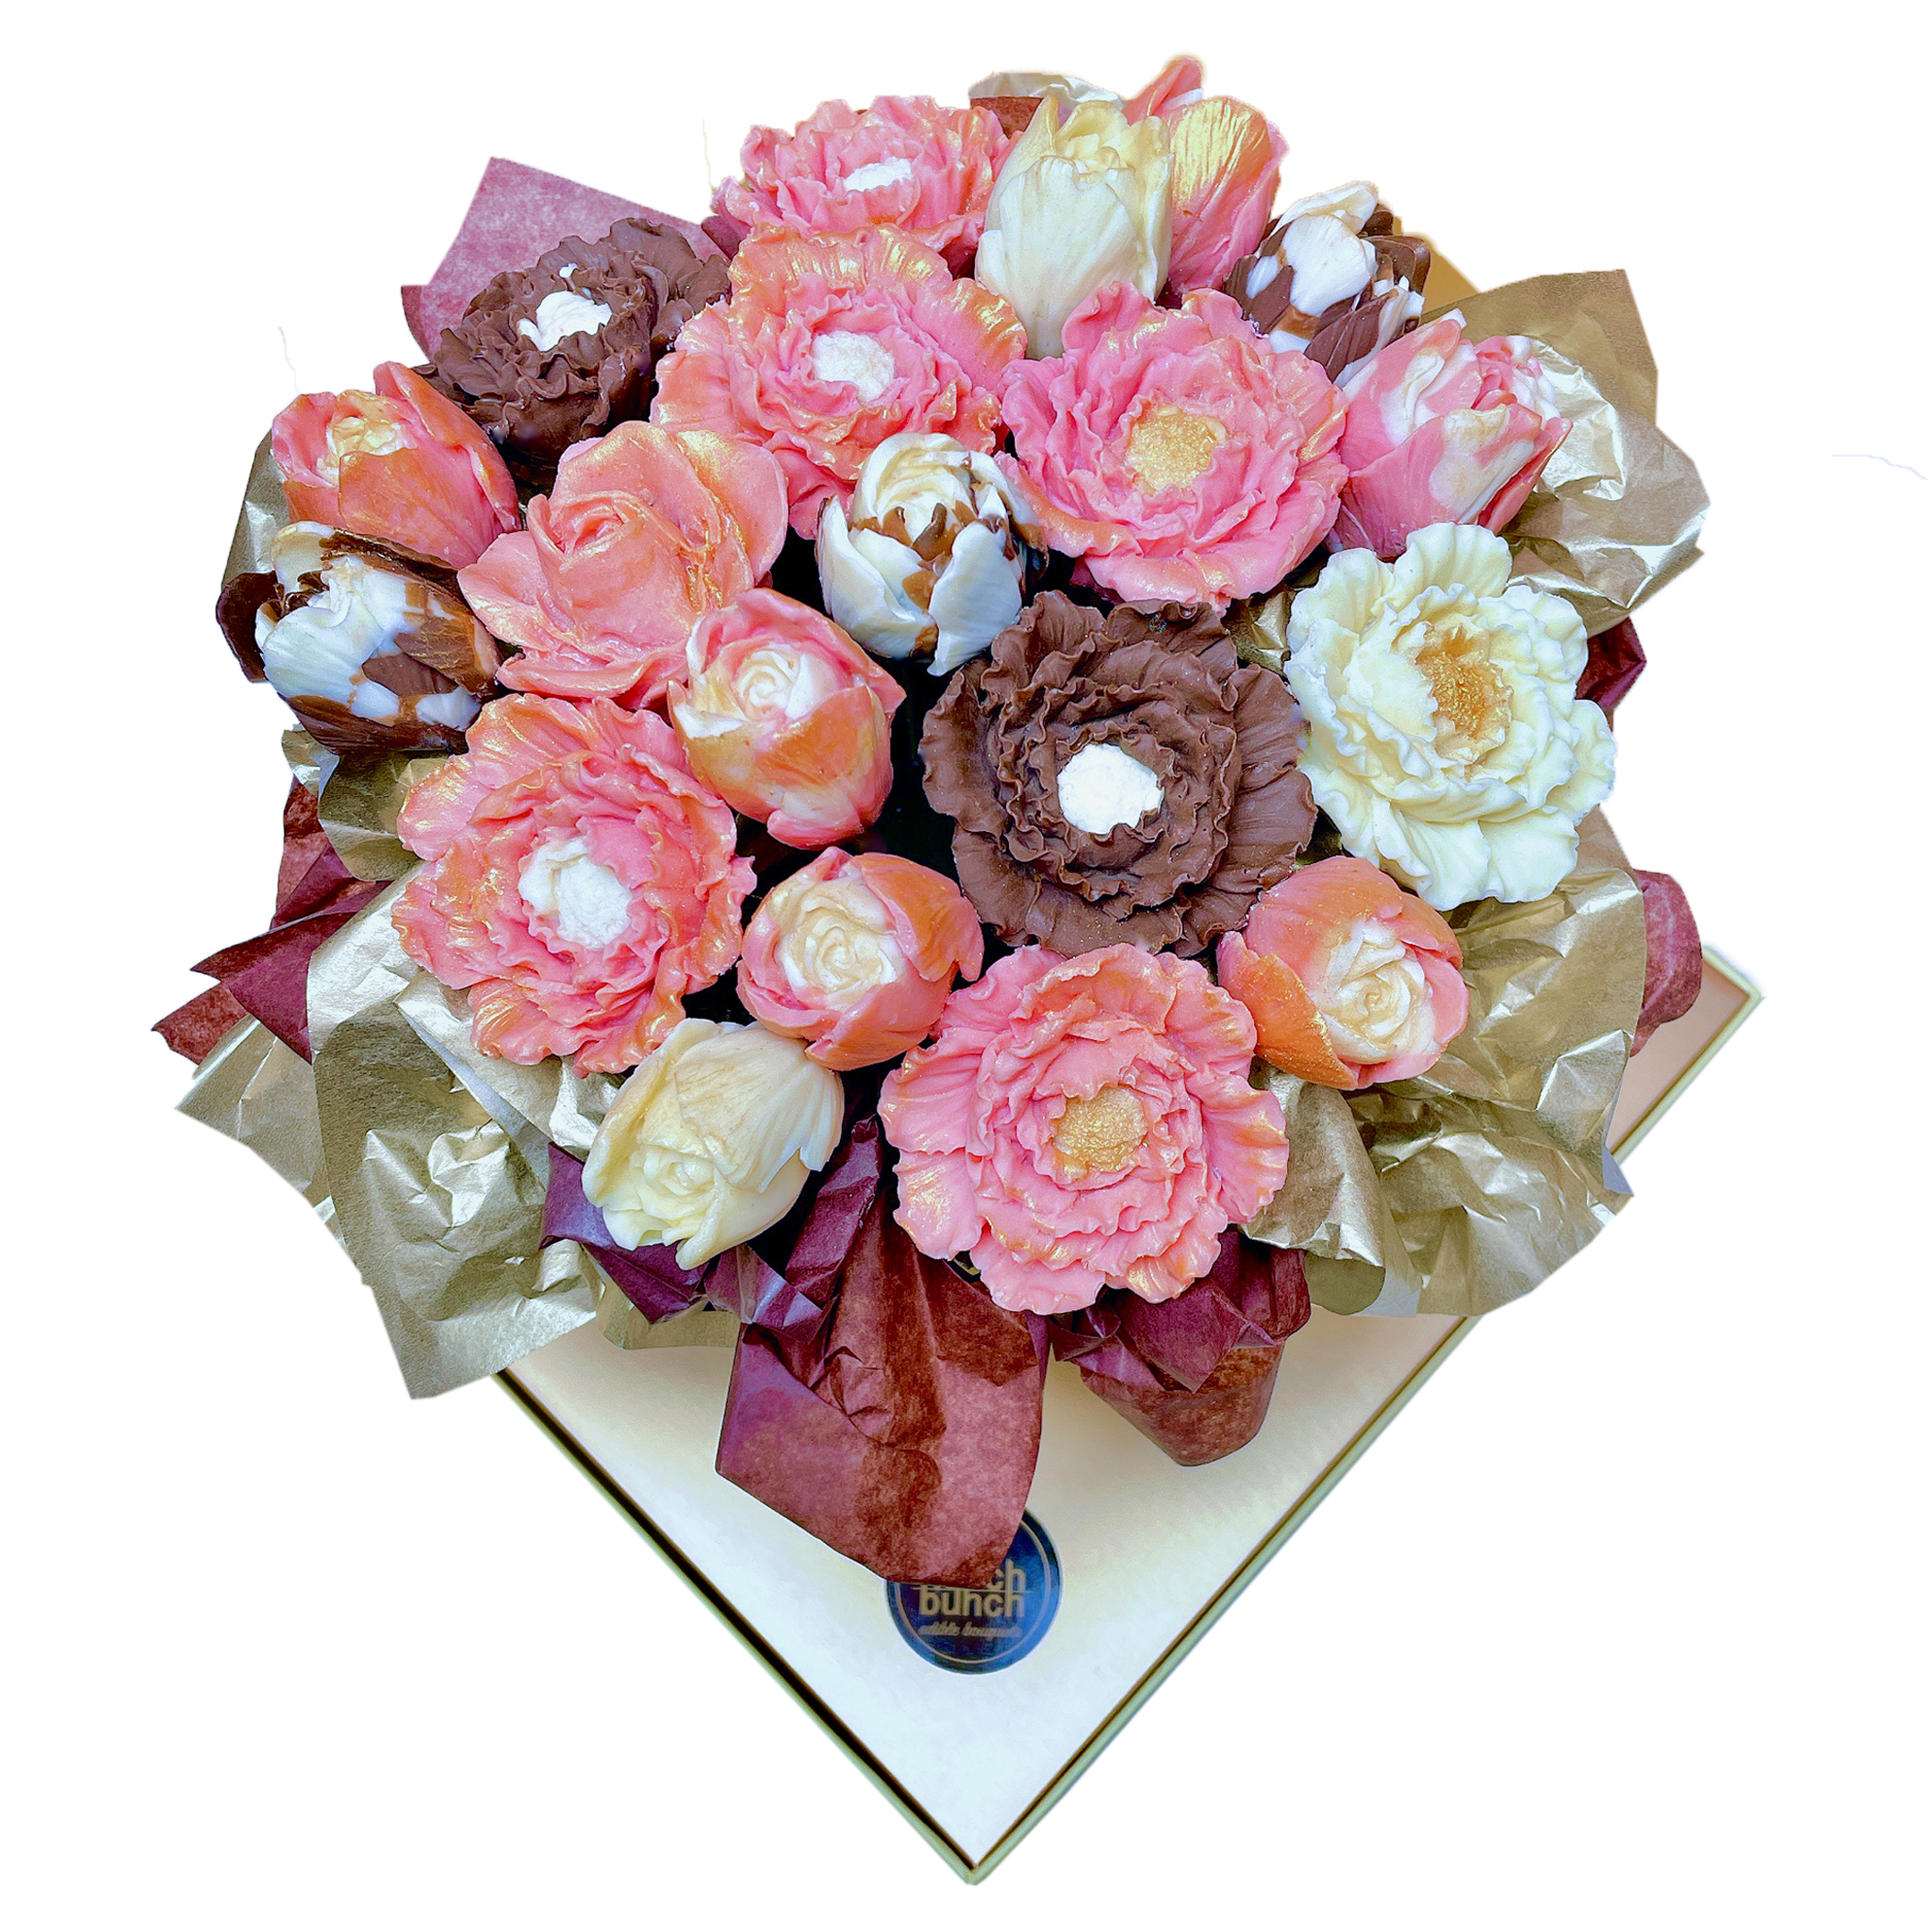 Feminine pink chocolate bouquet, chocolate flowers bouquet, 3-D chocolate roses, chocolate tulips, online chocolate flowers delivery